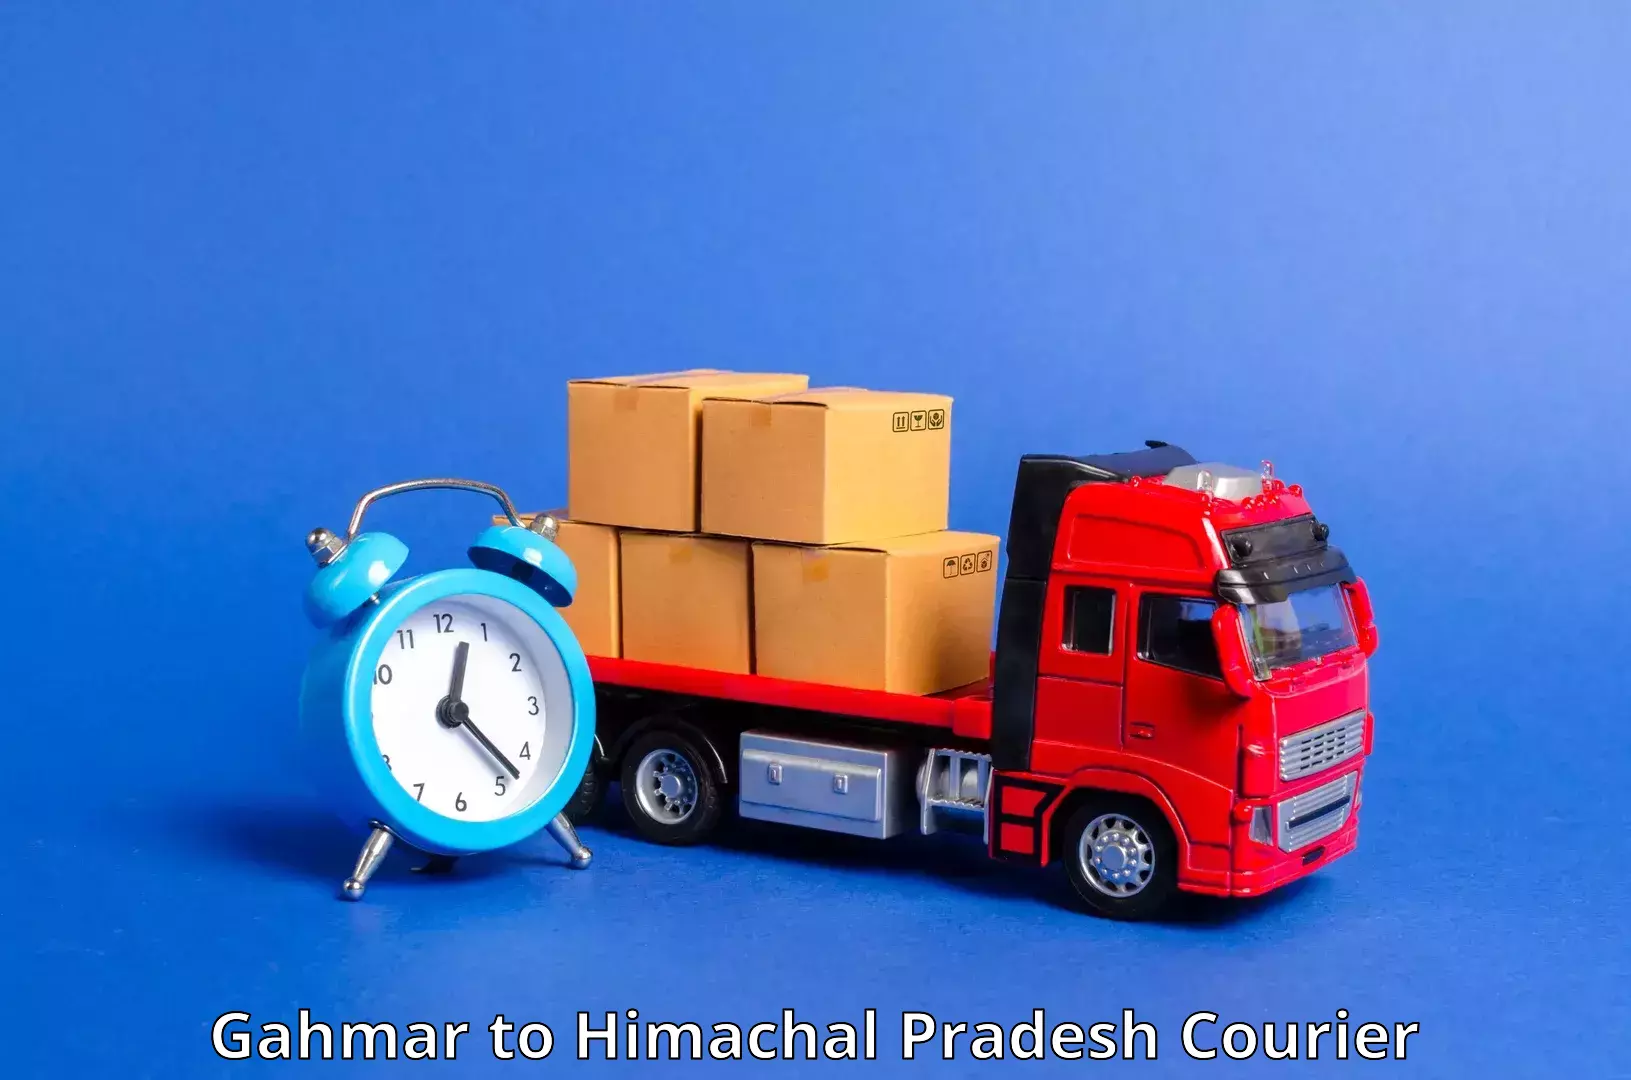 State-of-the-art courier technology Gahmar to Jahu